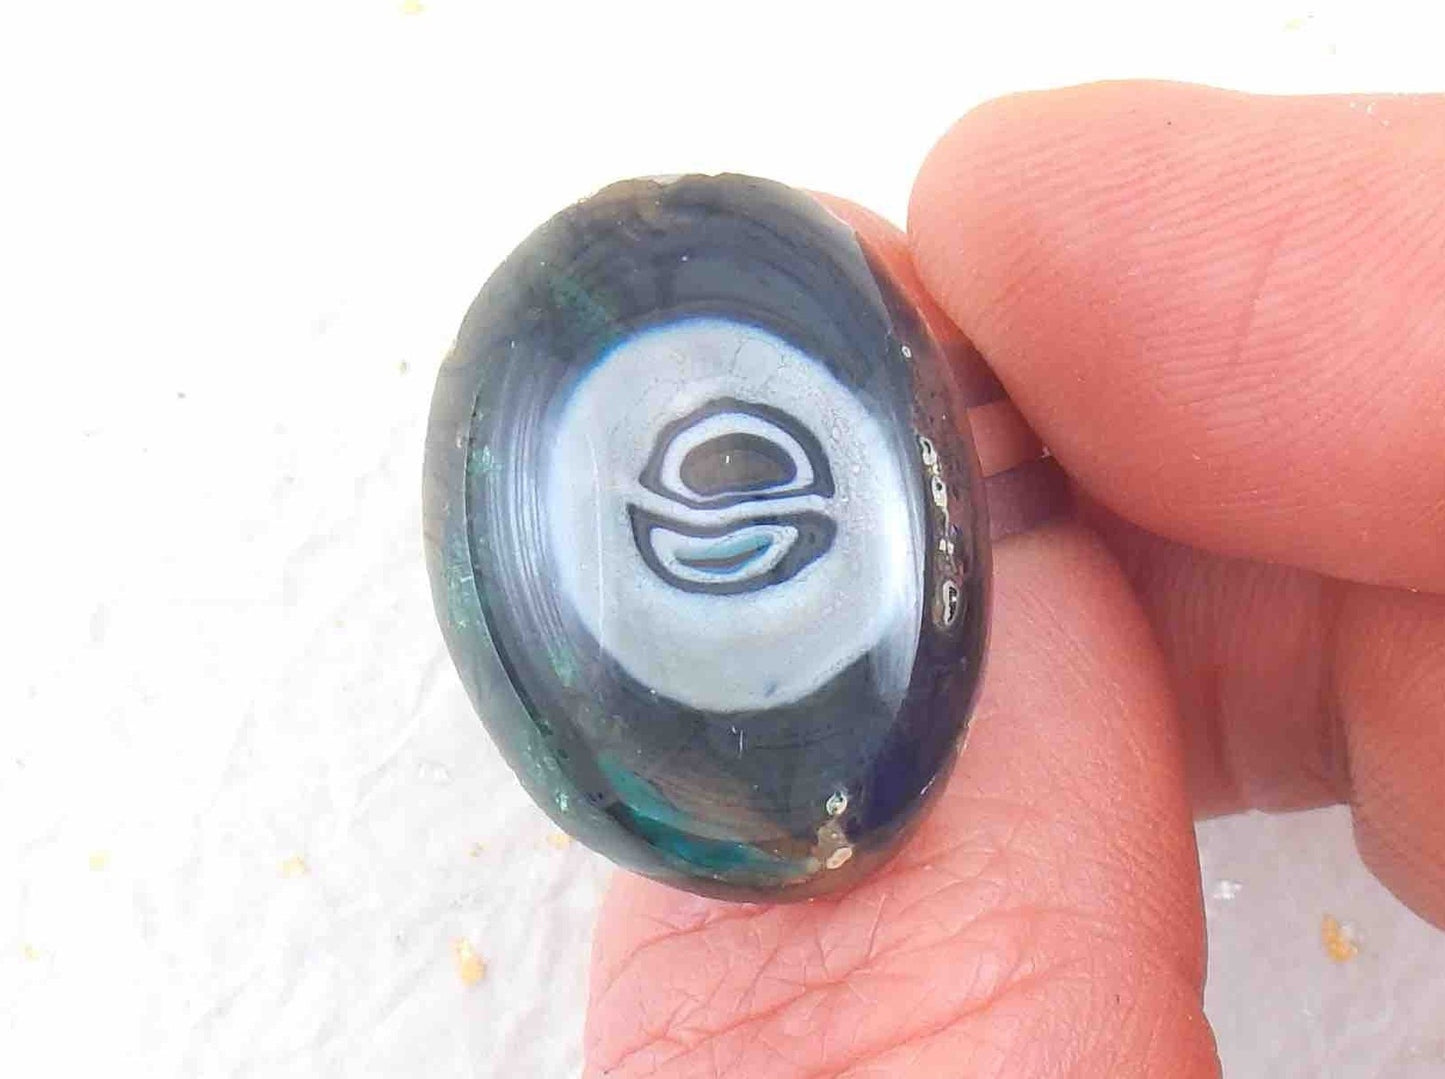 Finger ring with large oval dark green cabochon (Murano style glass handmade in Montreal), white yin-yang pattern, stainless steel adjustable base (US 8-9)